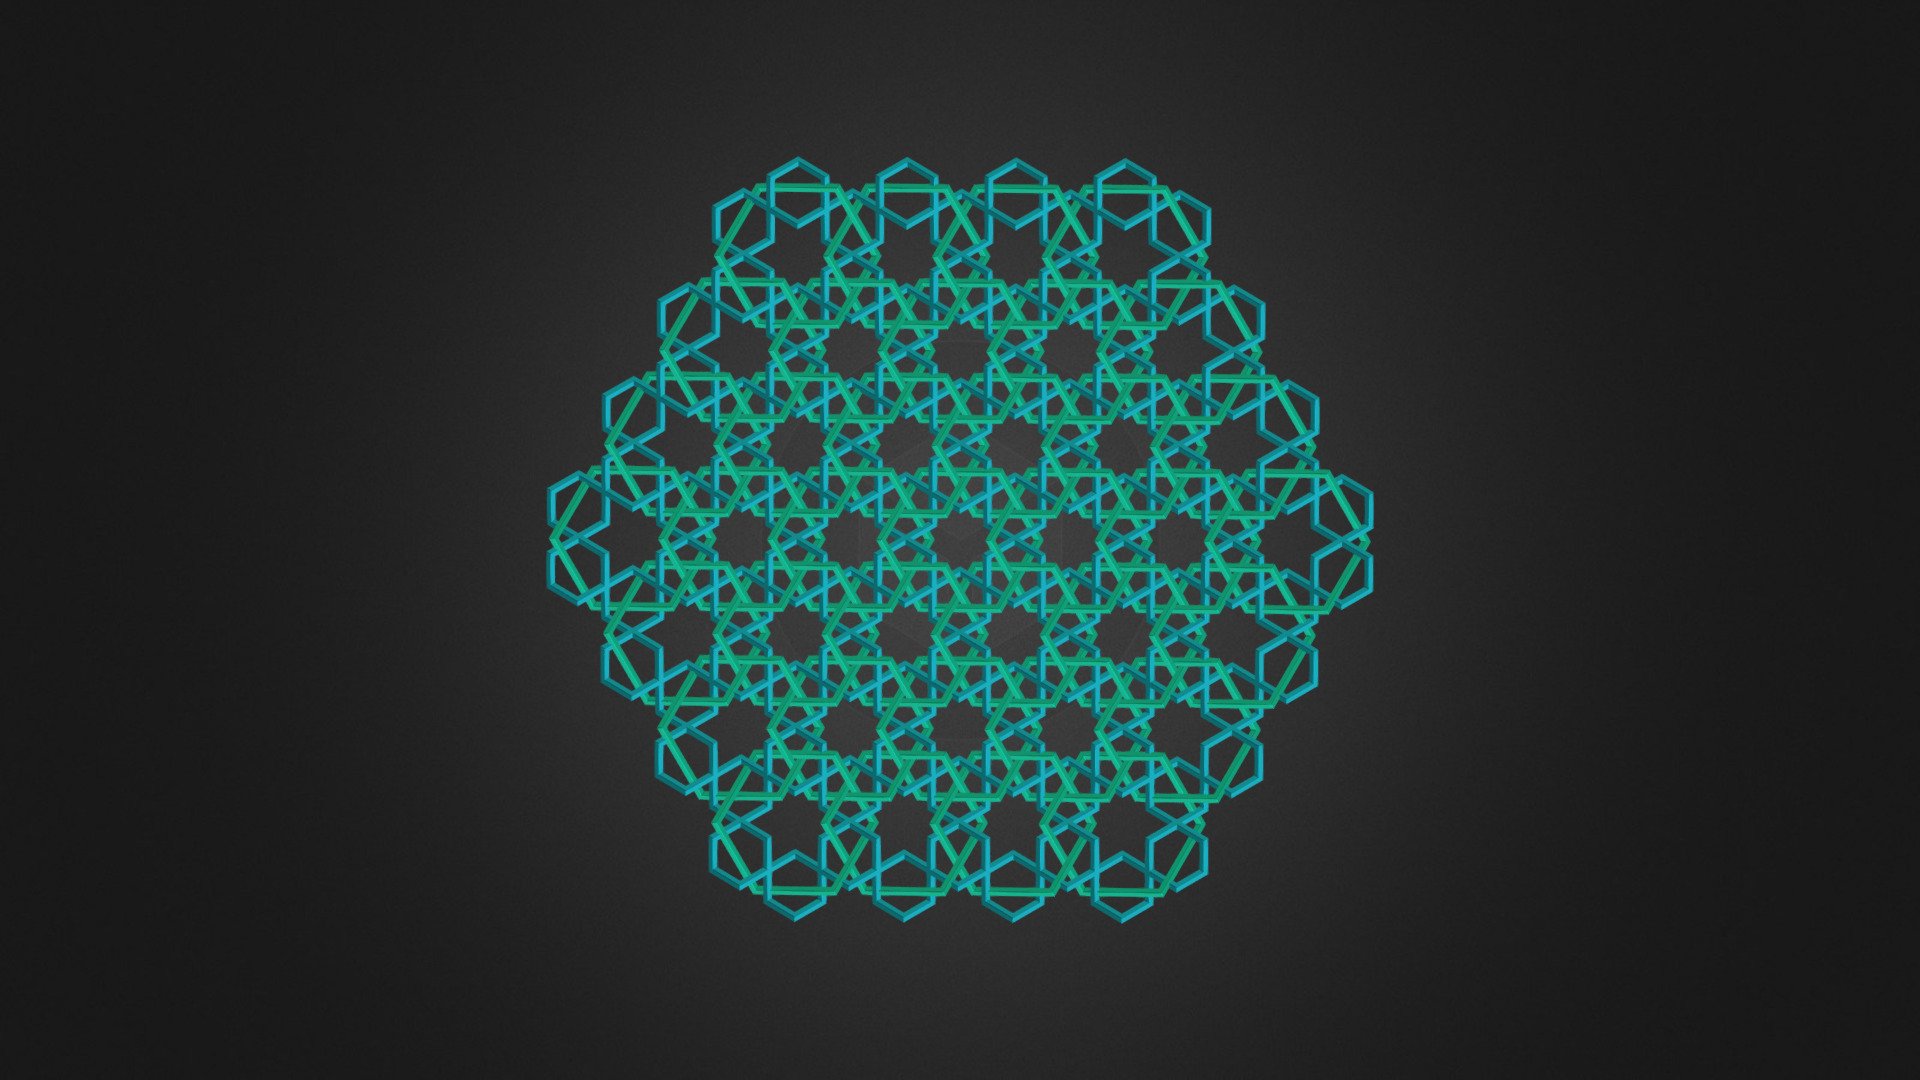 Hexagon based pattern reinterpreted as an isometric view of two cubic 3D structures with different orientations.  

2D reference picture ▼  

 - pia_085_001 - 3D model by Frédéric Robin (@robinfredericf) 3d model